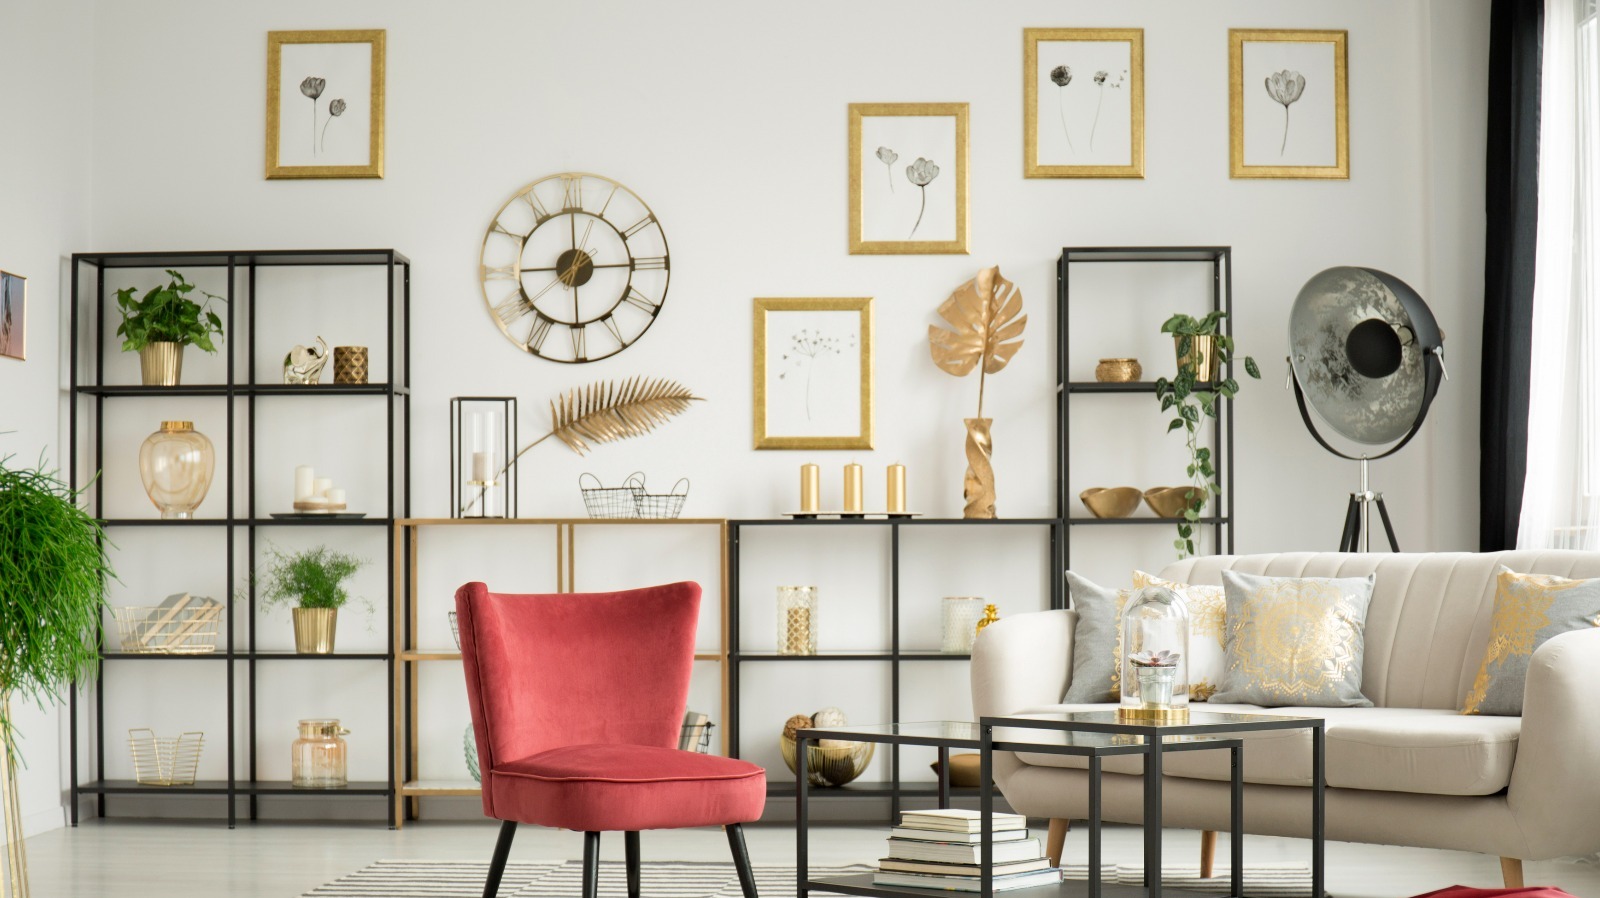 https://www.housedigest.com/img/gallery/how-to-use-gold-finish-in-your-home-decor/l-intro-1660551953.jpg